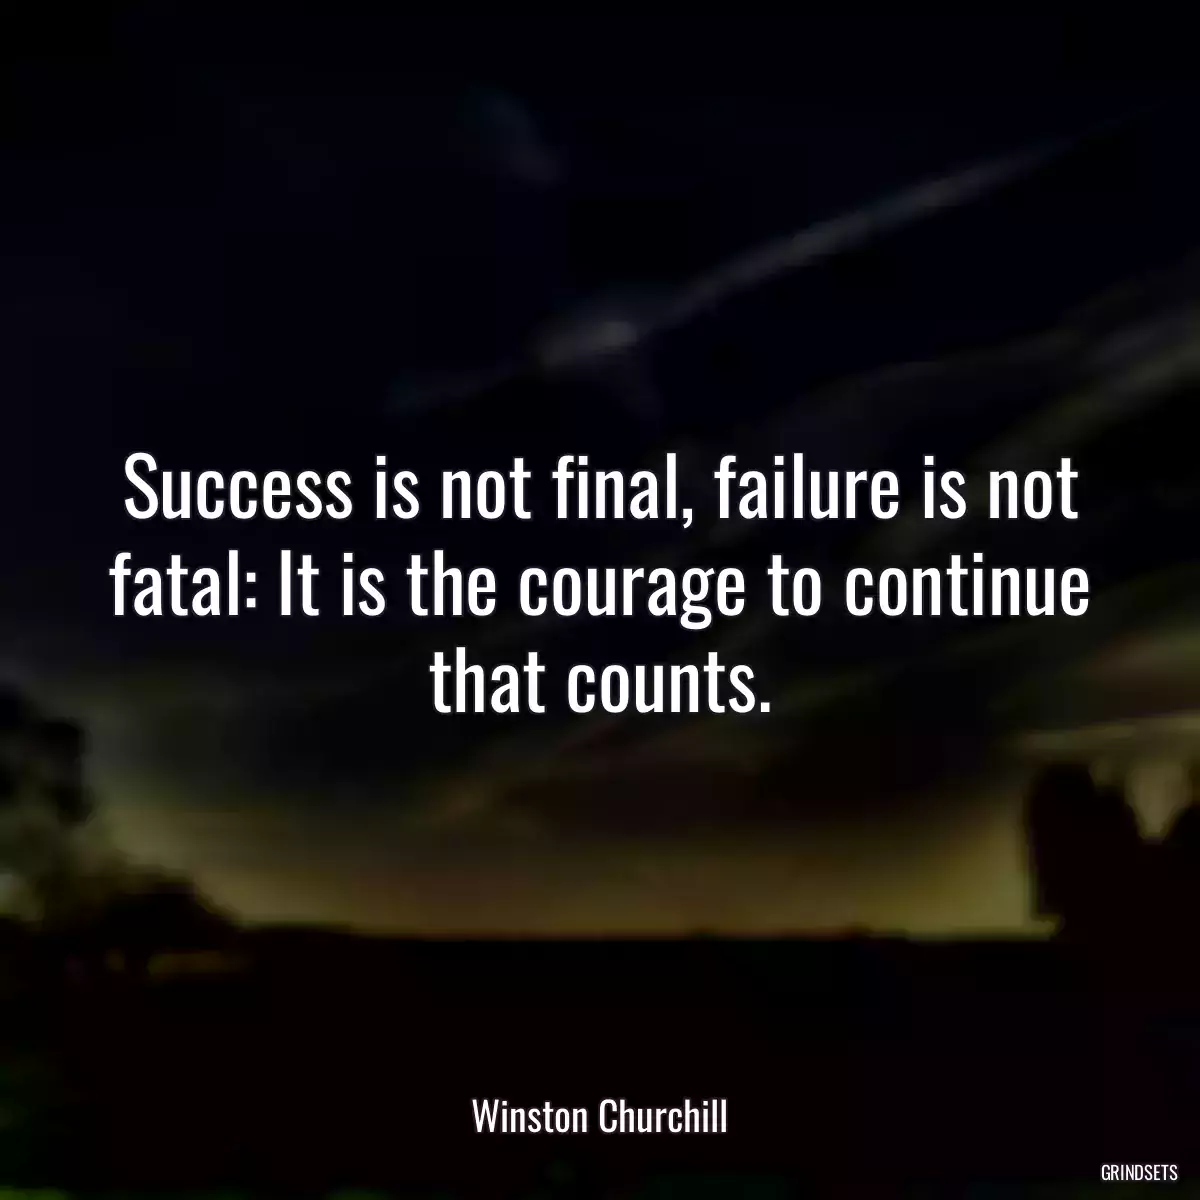 Success is not final, failure is not fatal: It is the courage to continue that counts.